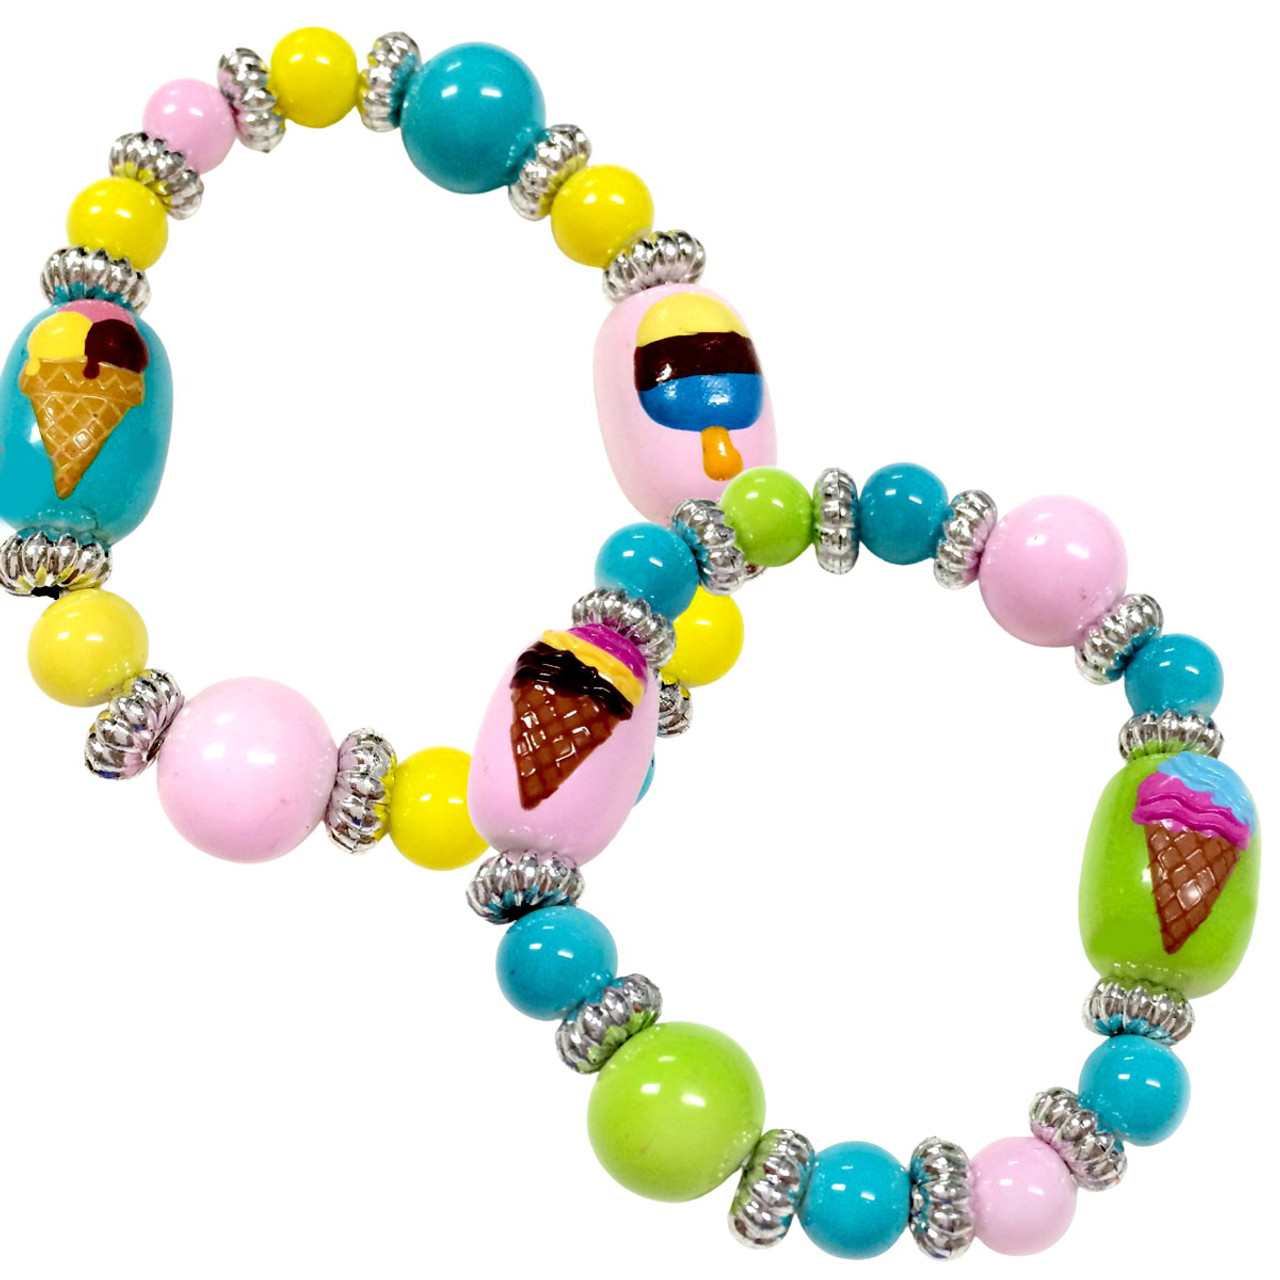 Painted Lollypop Candy Kids Glass Bead Bracelets Two Styles Set